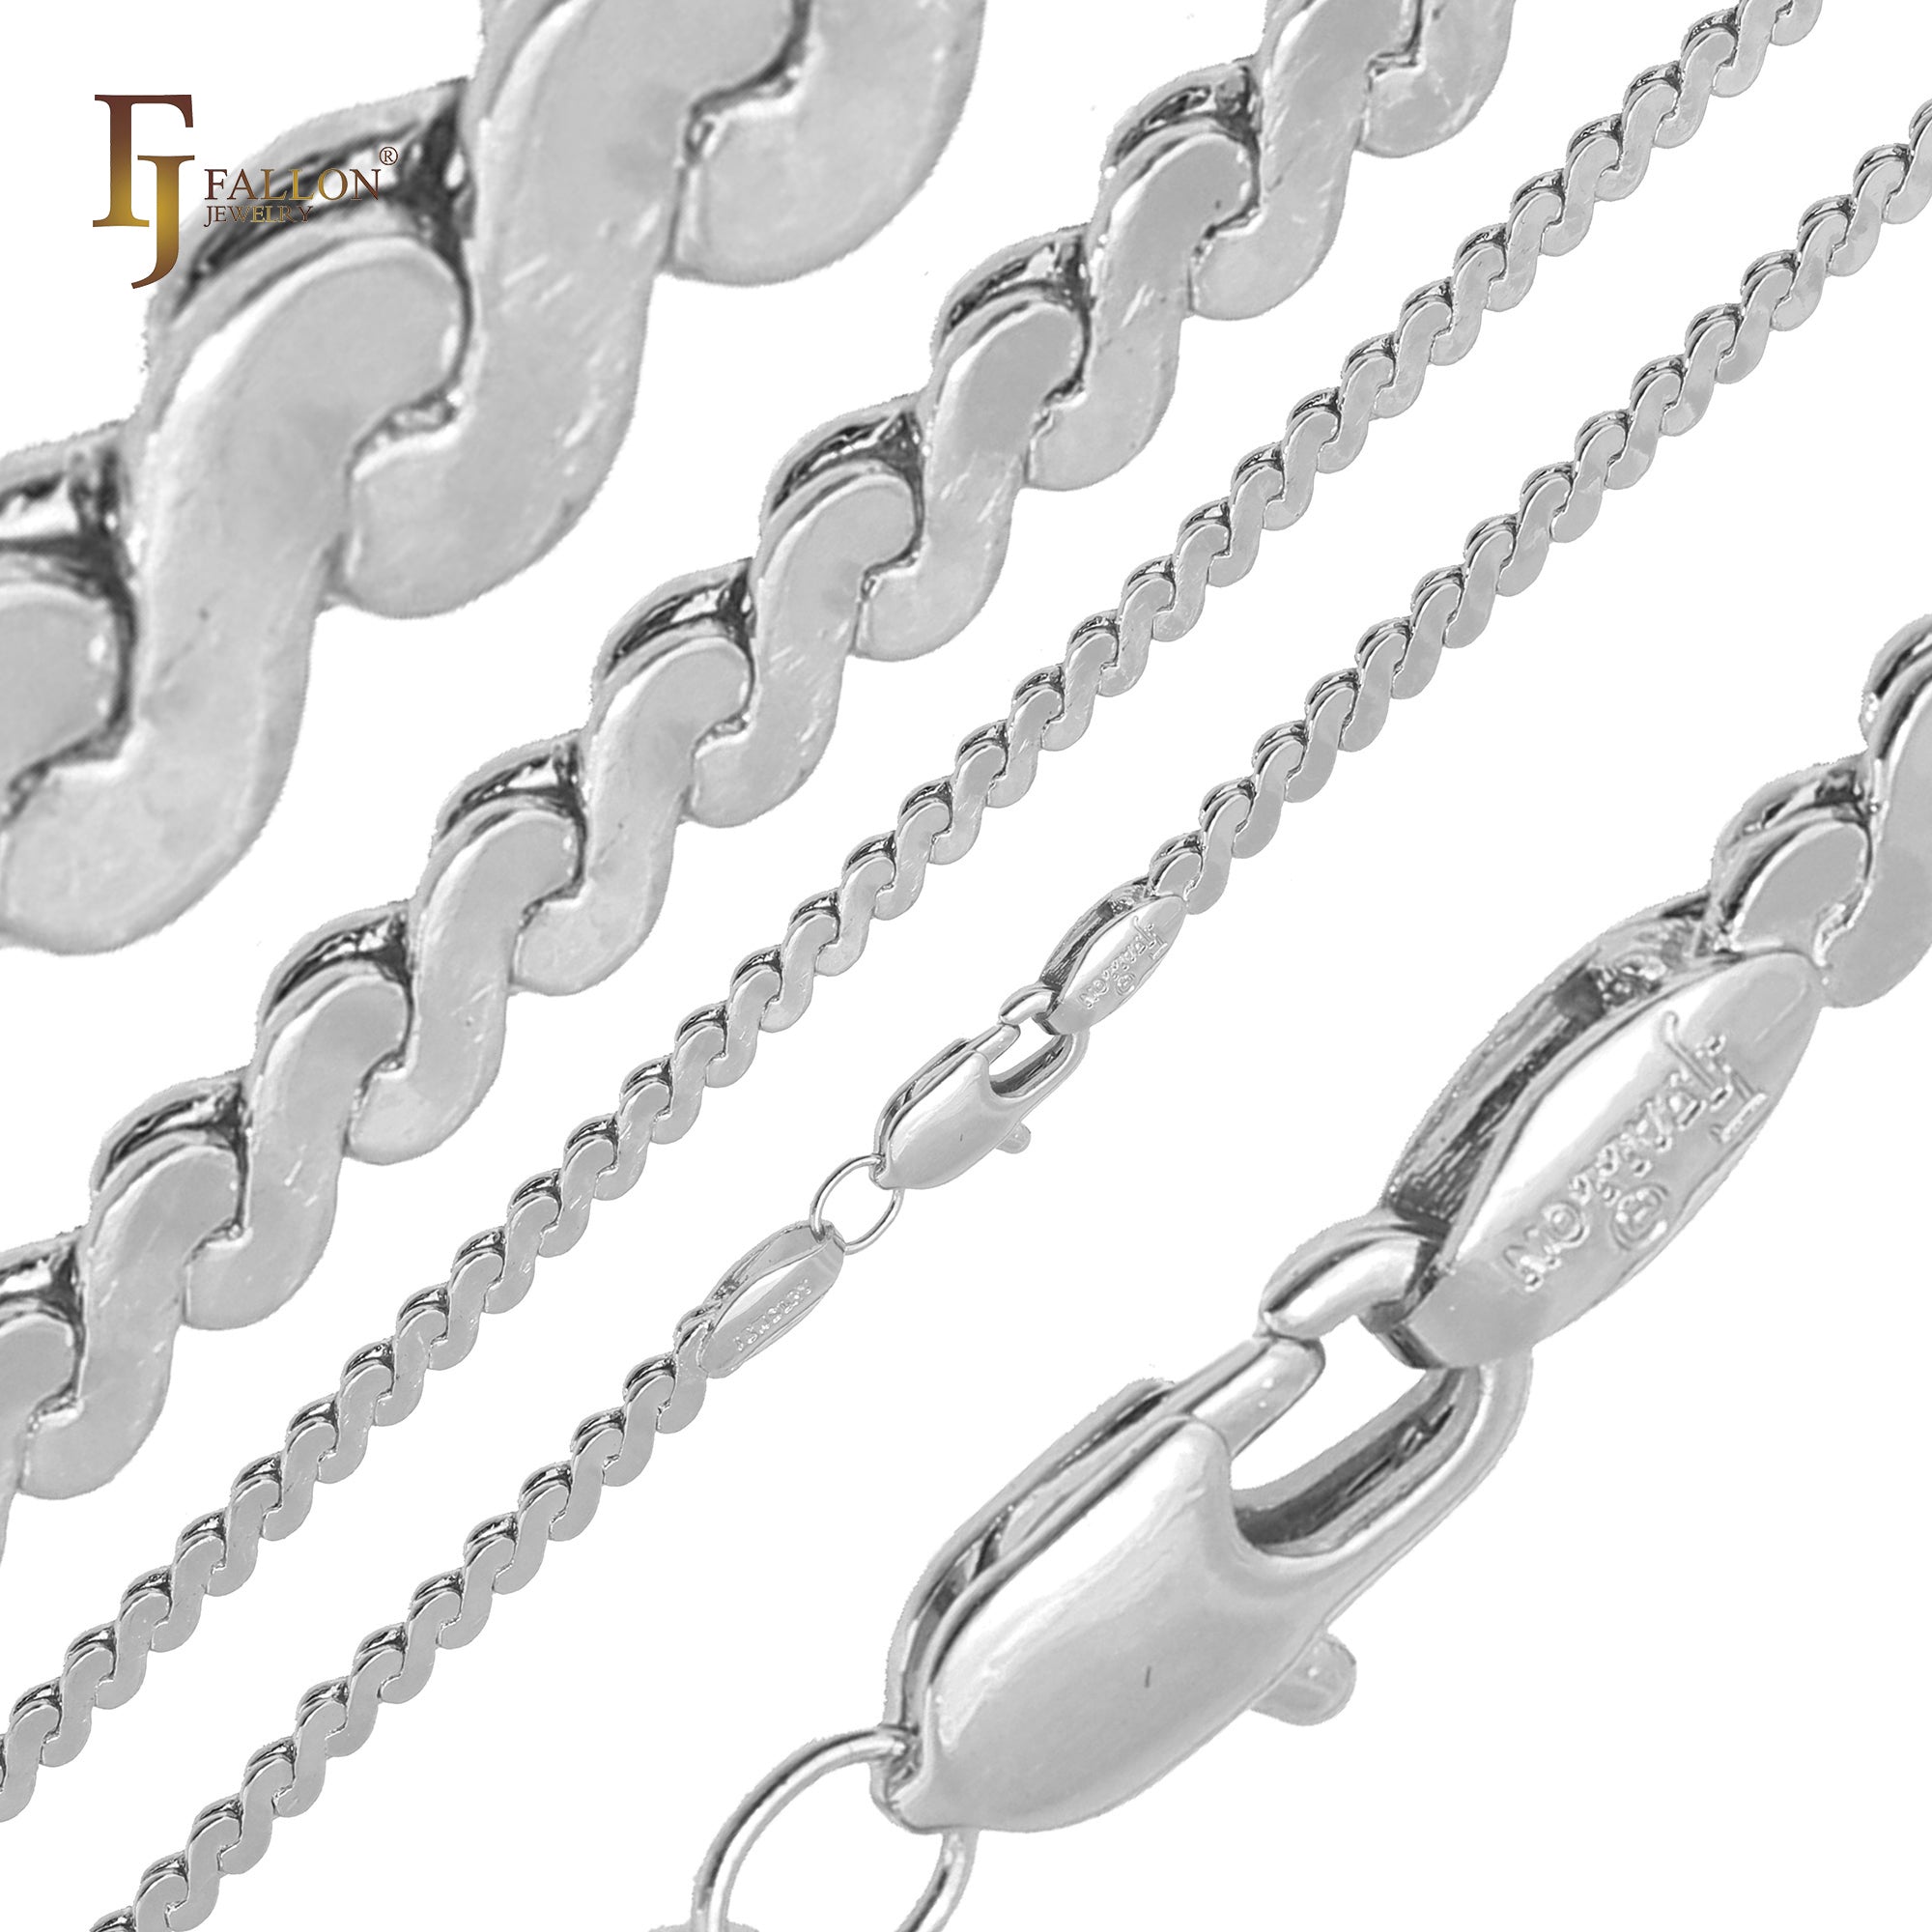 Serpentine fancy link wide Chains plated in 14K Gold, 18K Gold, Rose Gold and White Gold